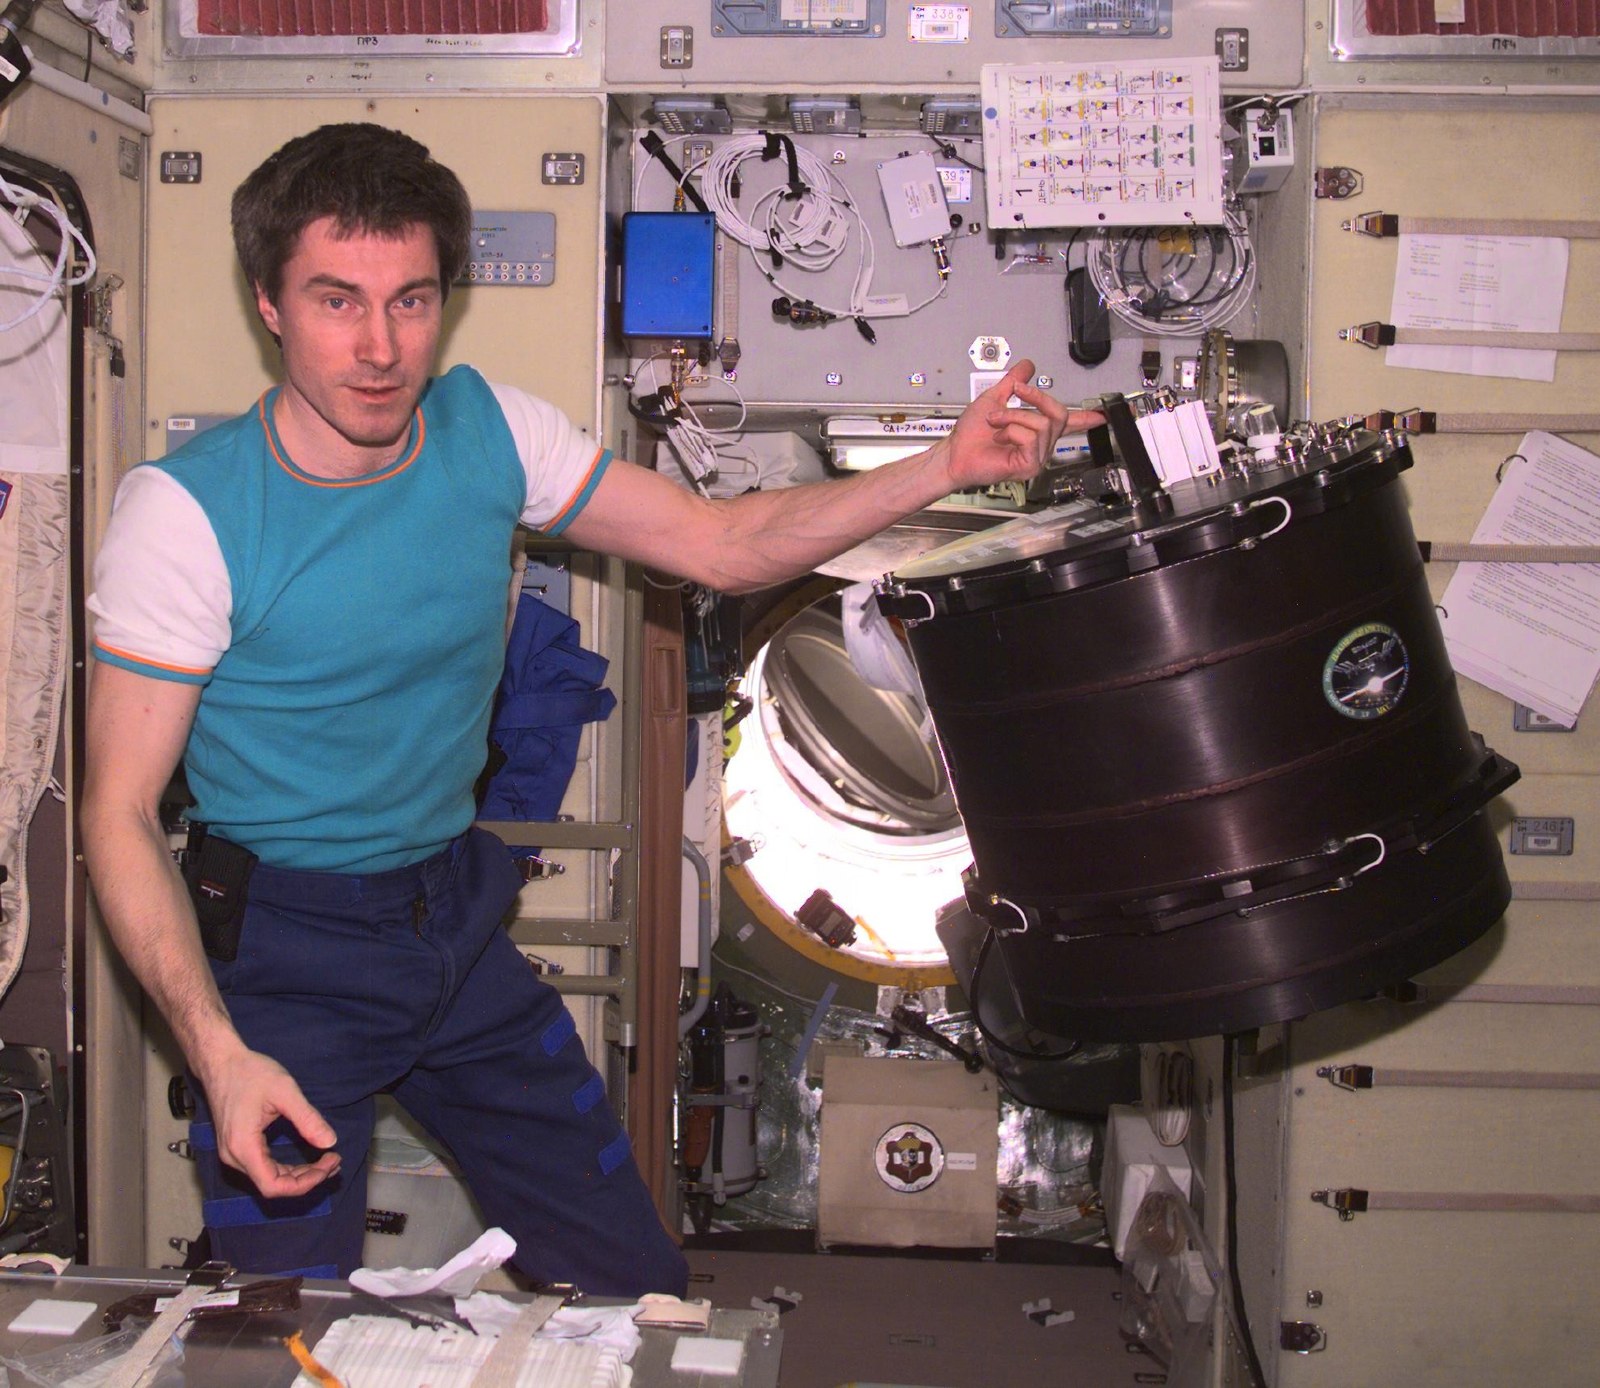 Sergei Krikalev with the PKE experiment